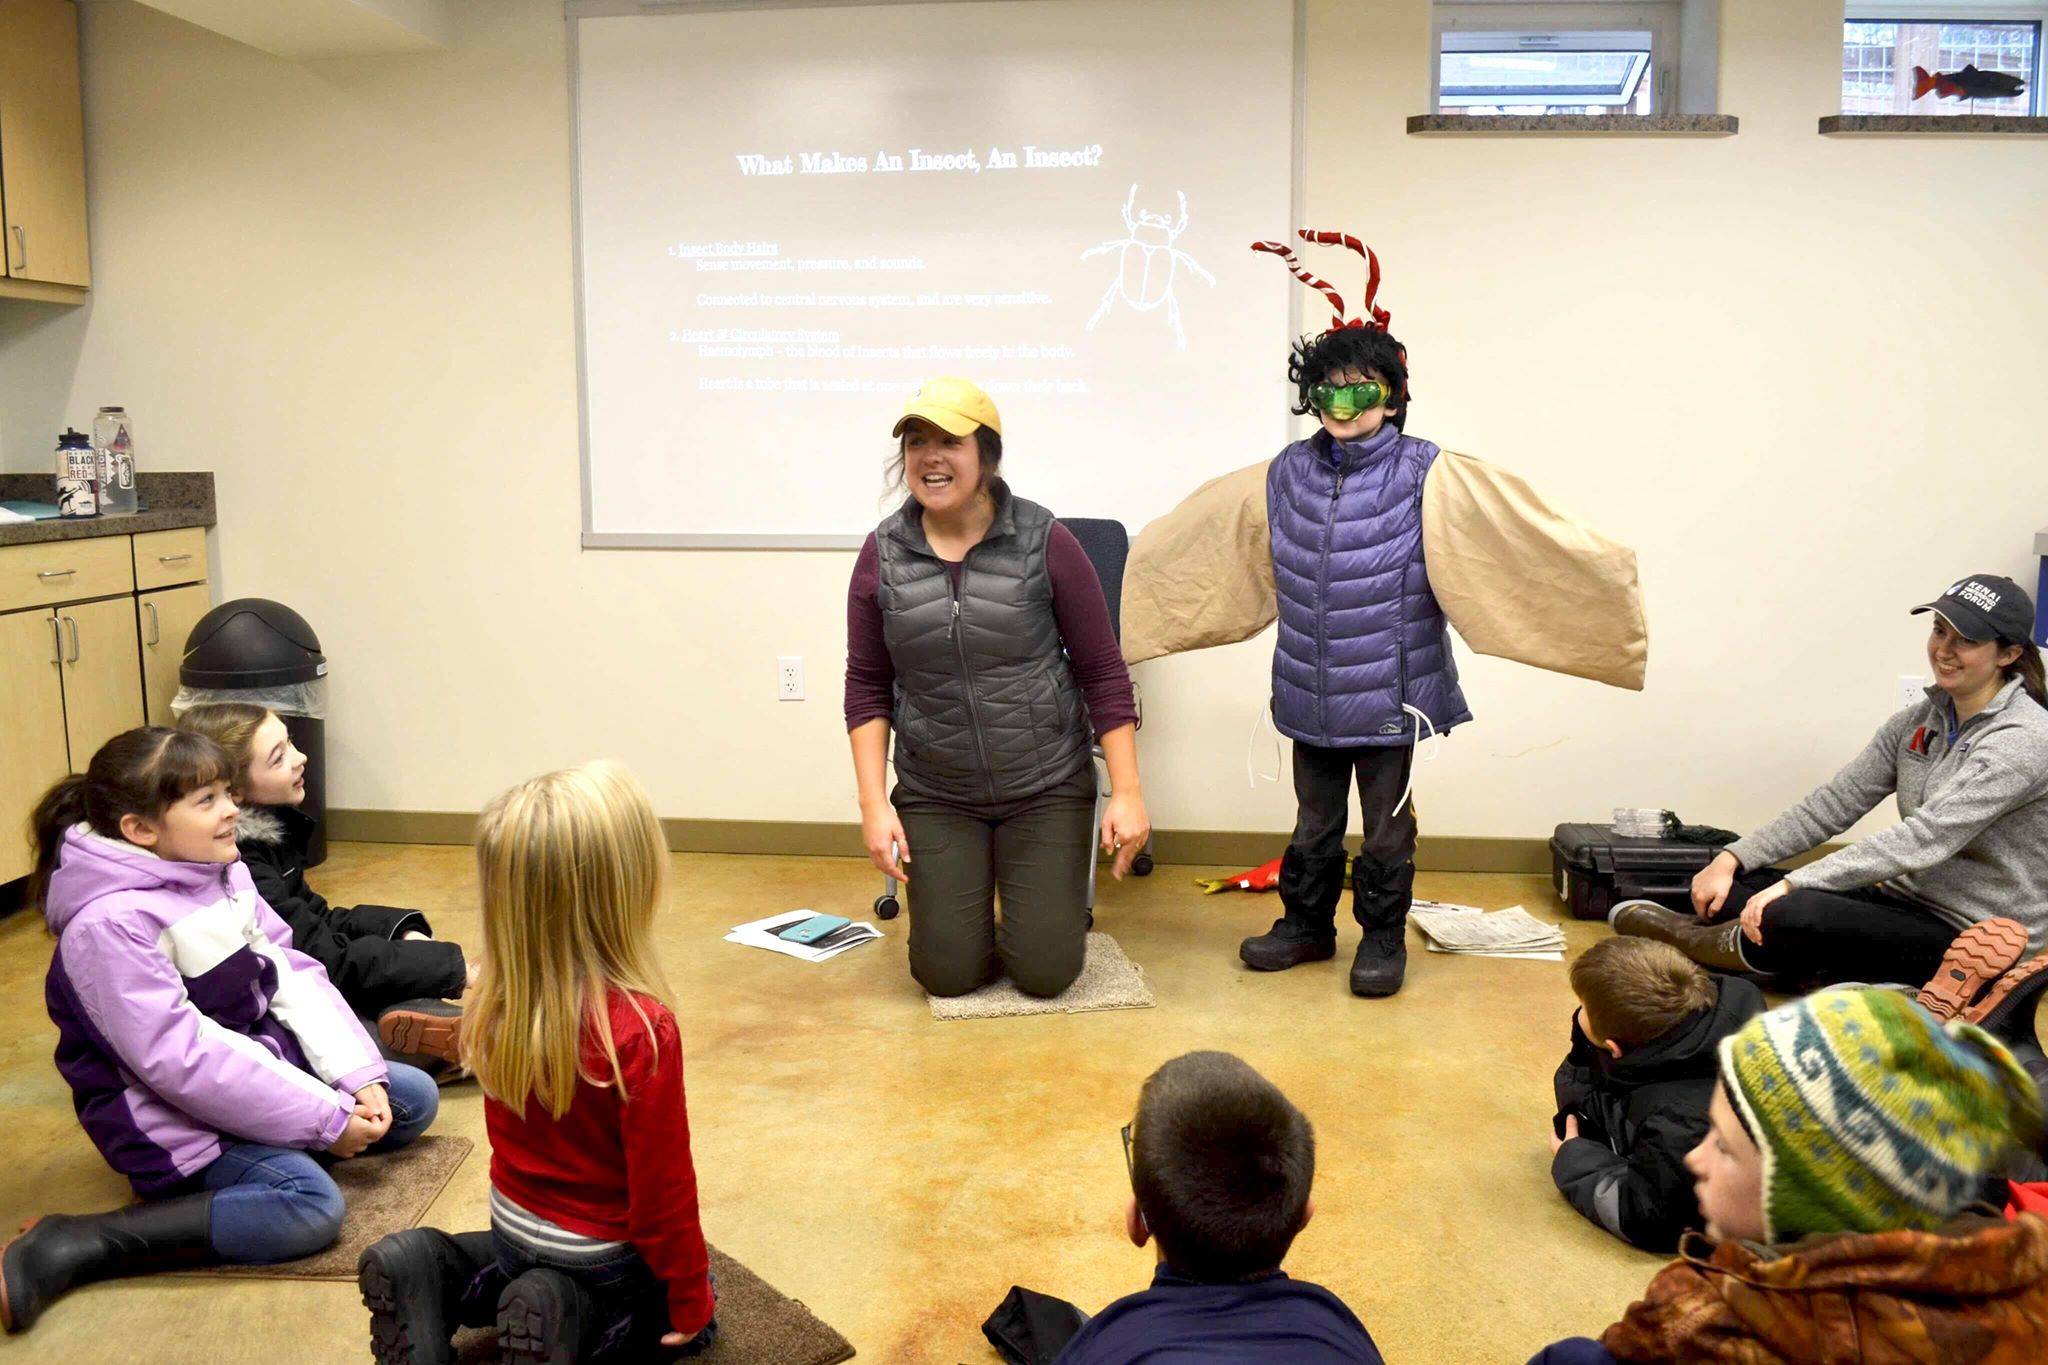 Megan Pike, Kenai Watershed Forum’s education specialist and Adopt-A-Stream program coordinator, dresses an Adopt-A-Stream student as an insect in a classroom lesson on the anatomy of bugs, on Thursday, Nov. 7, 2019, in Soldotna, Alaska. (Photo by Victoria Petersen/Peninsula Clarion)